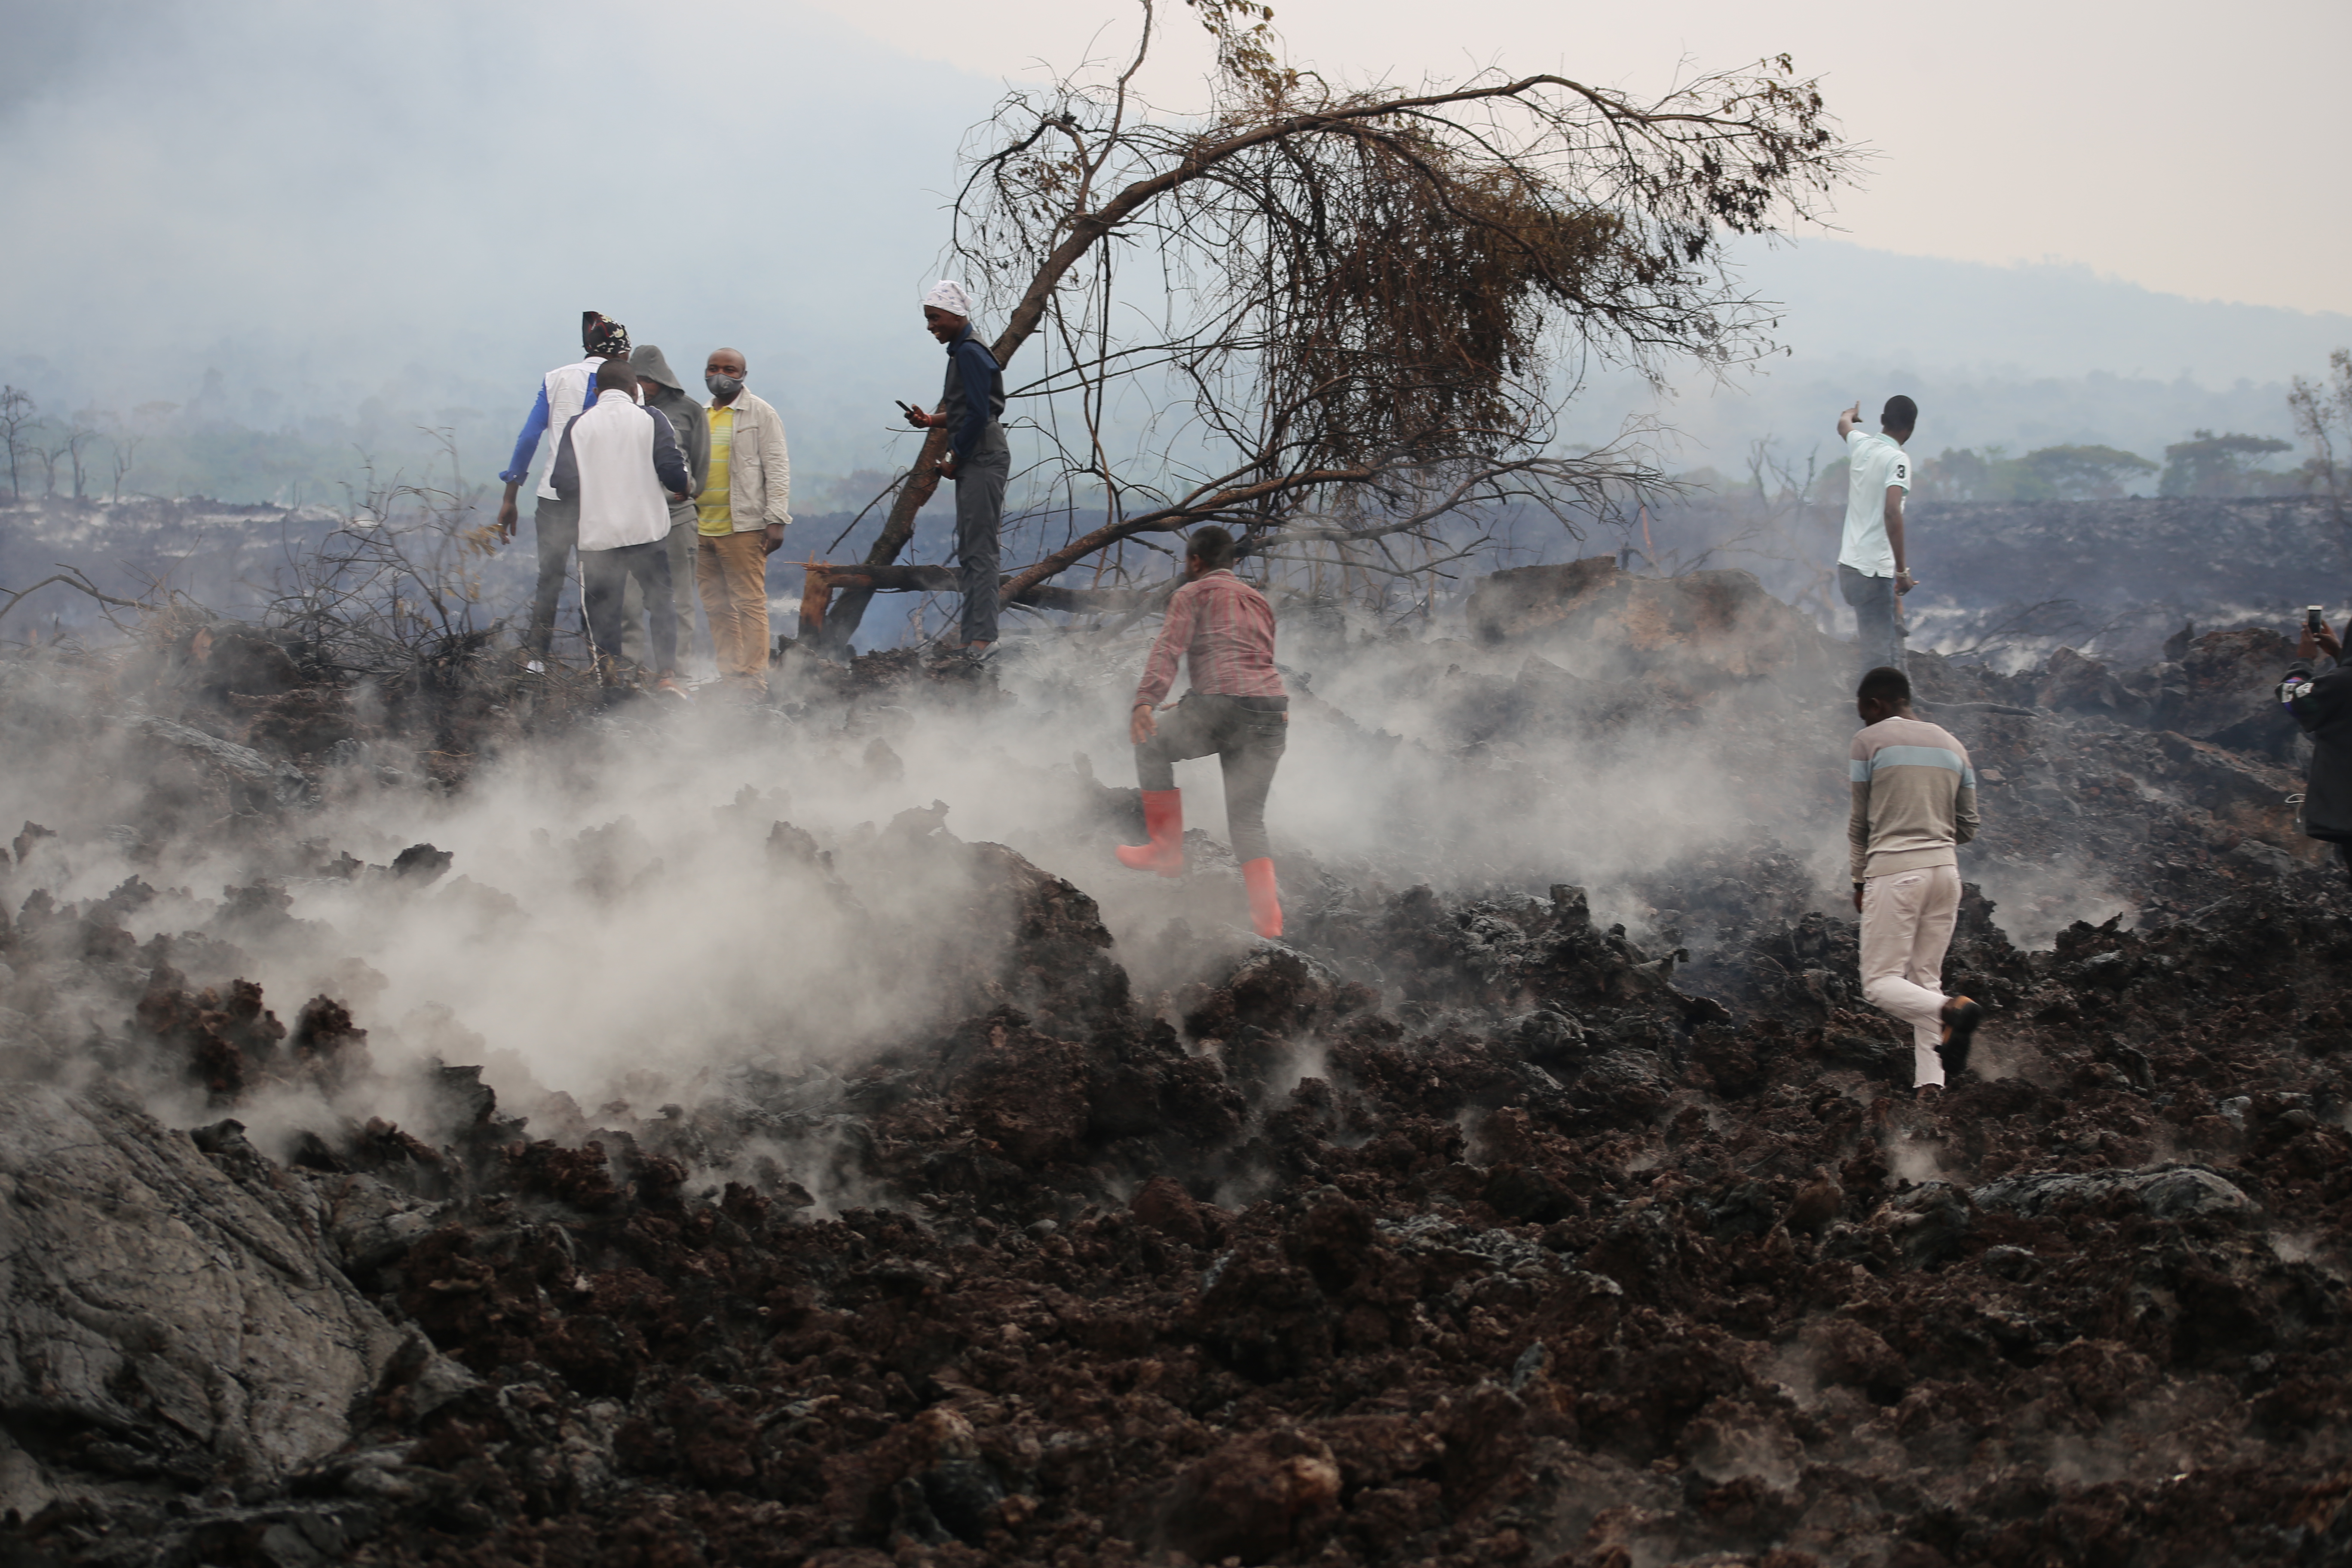 Recovering from the eruption of Mount Nyiragongo